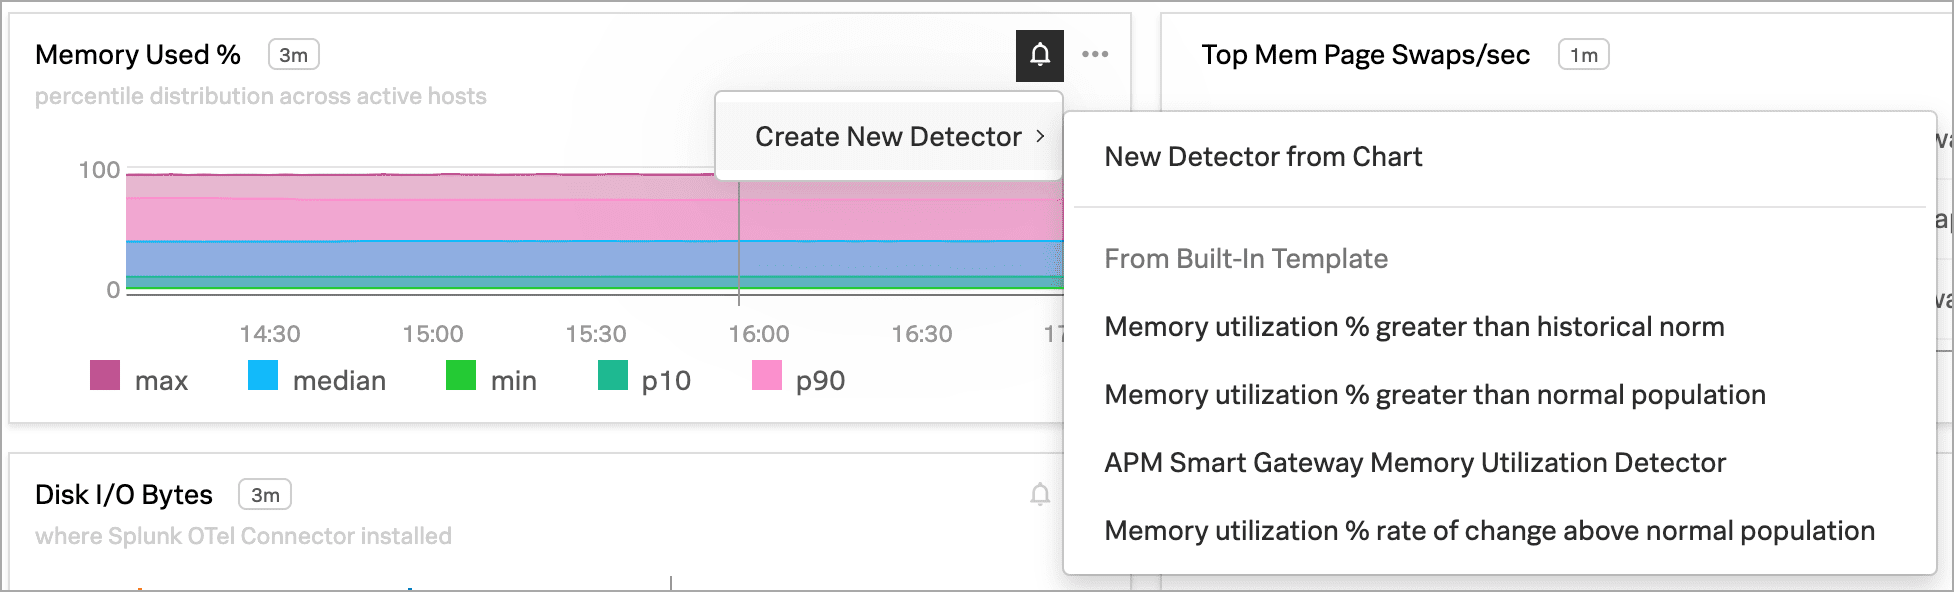 This screenshot shows the New Detector from Chart menu displaying available built-in detctor templates, such as the Memory utilization % greater than historical norm template.